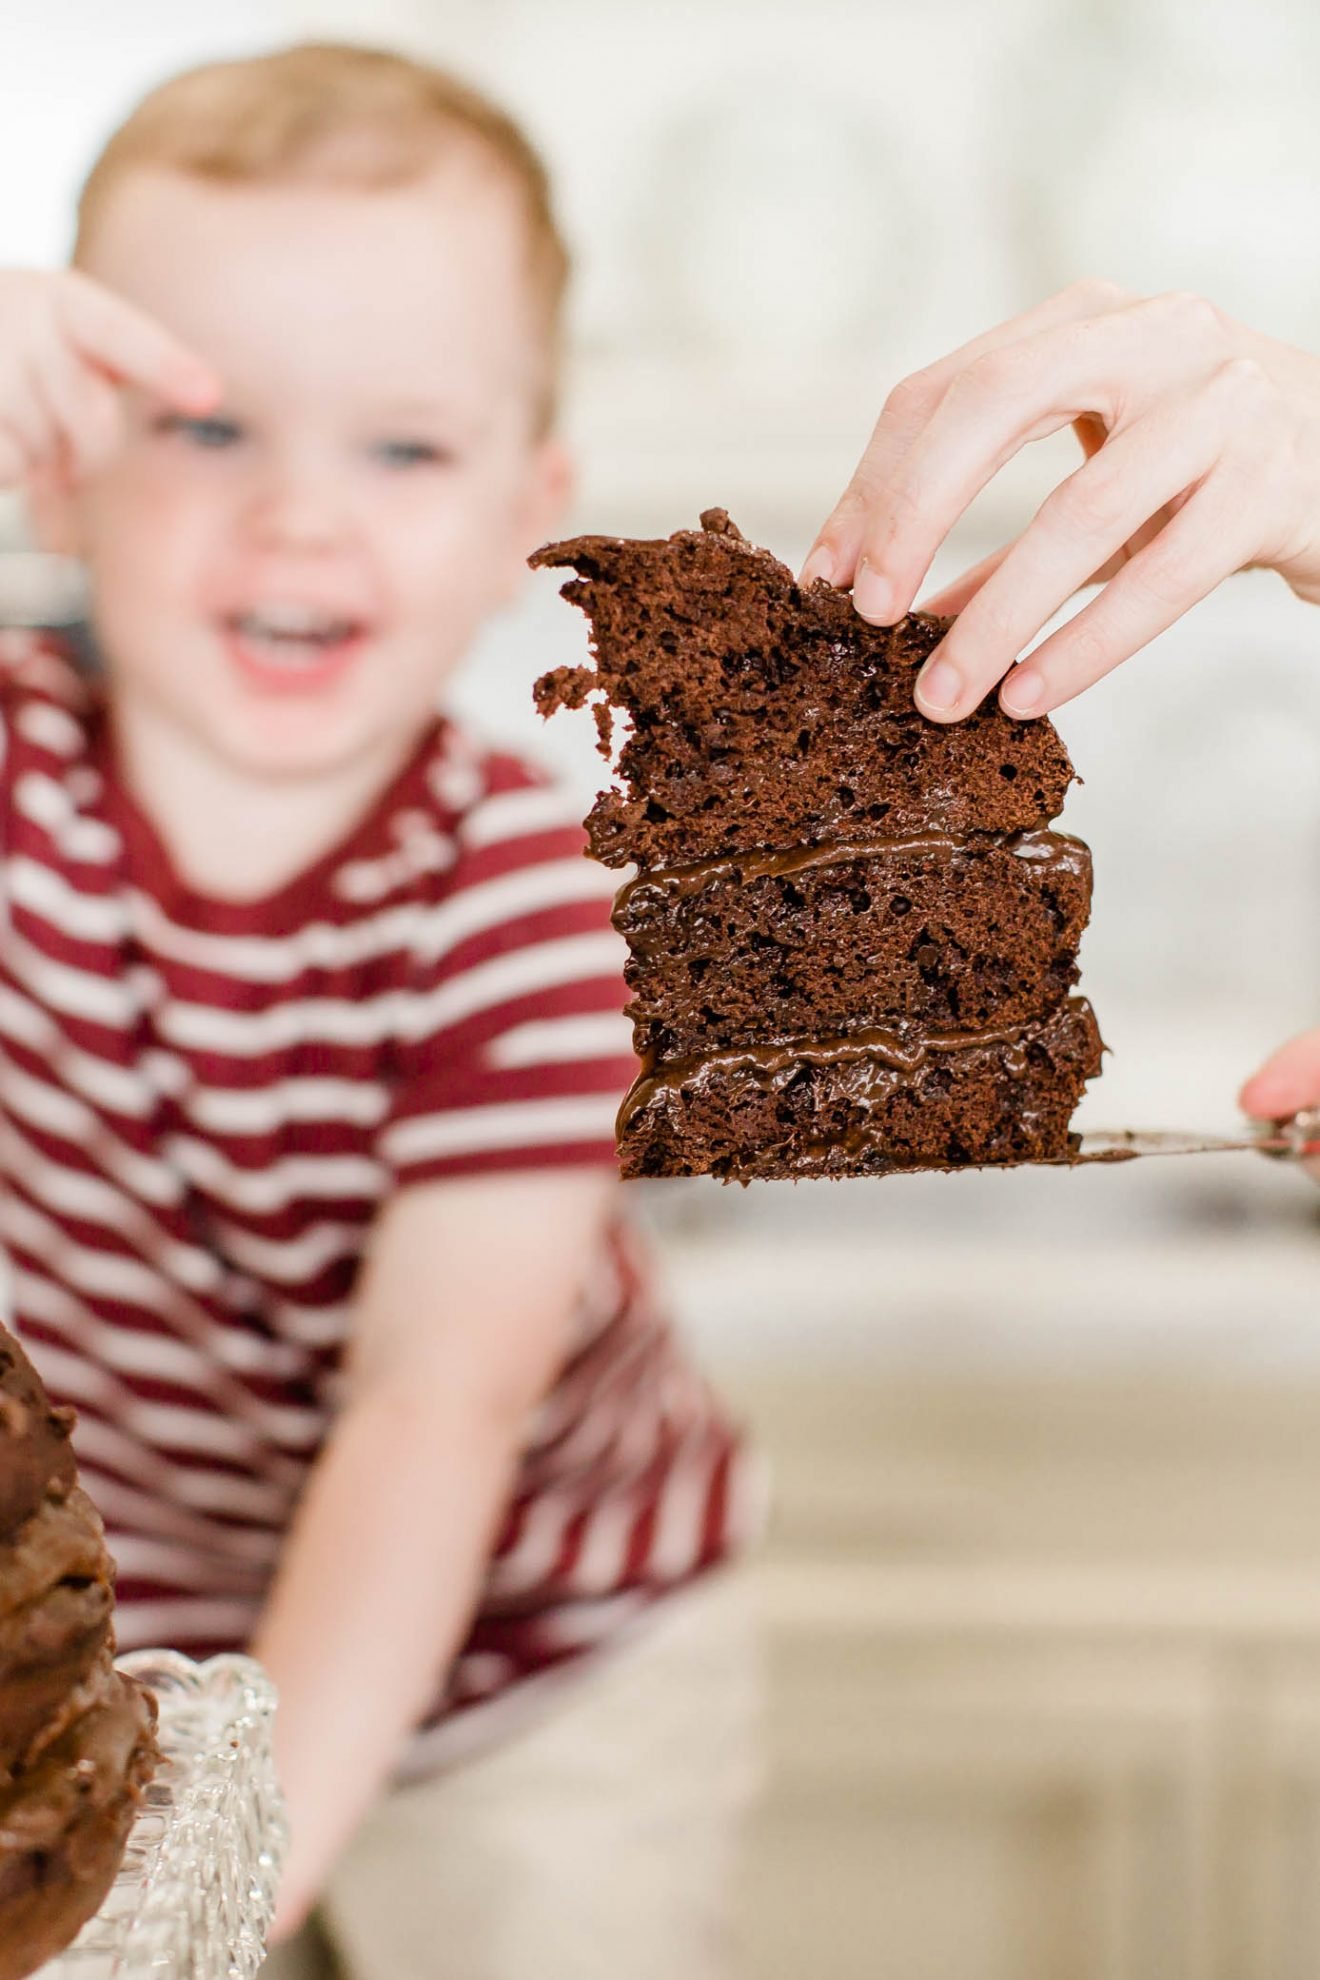 Slice of chocolate cake and little boy excited about it.